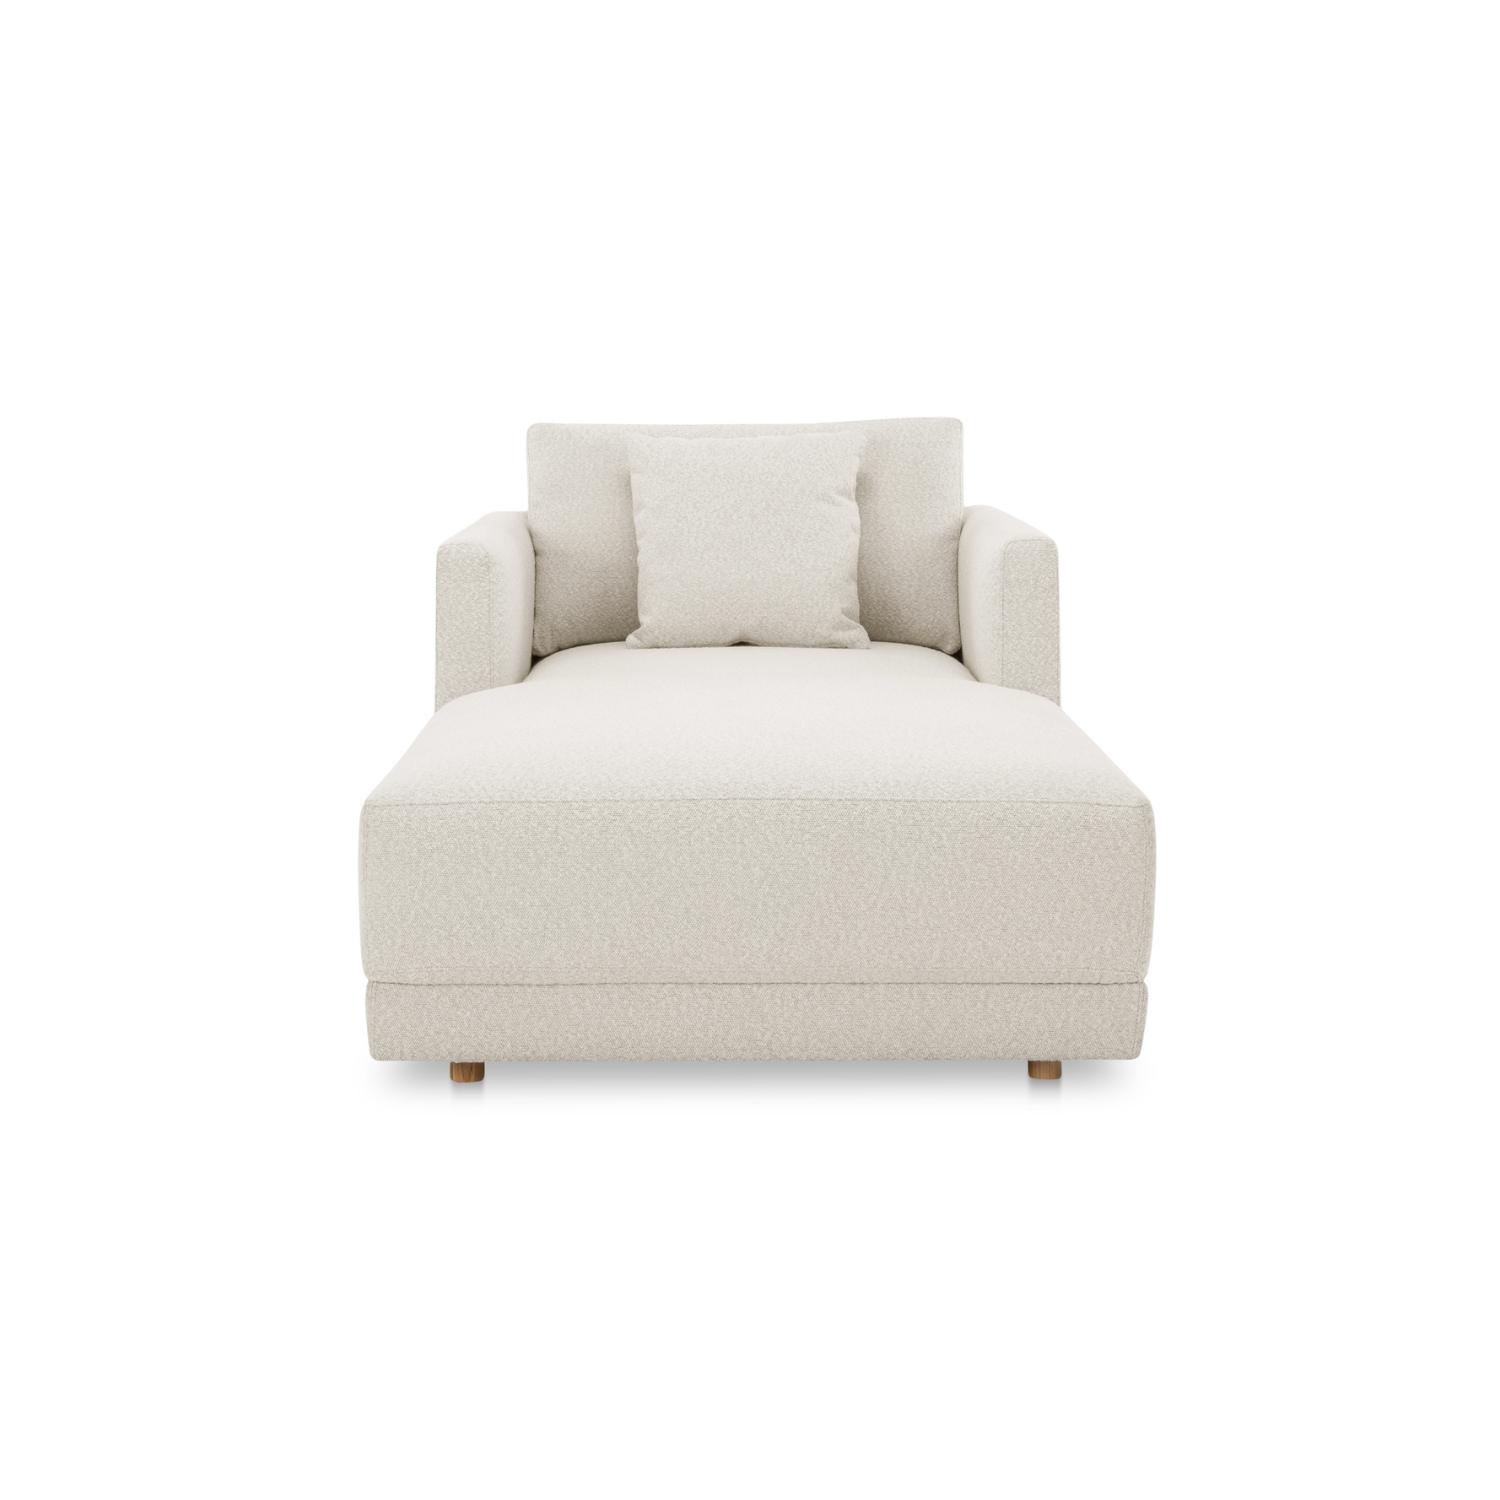 Bryn Heritage Chaise